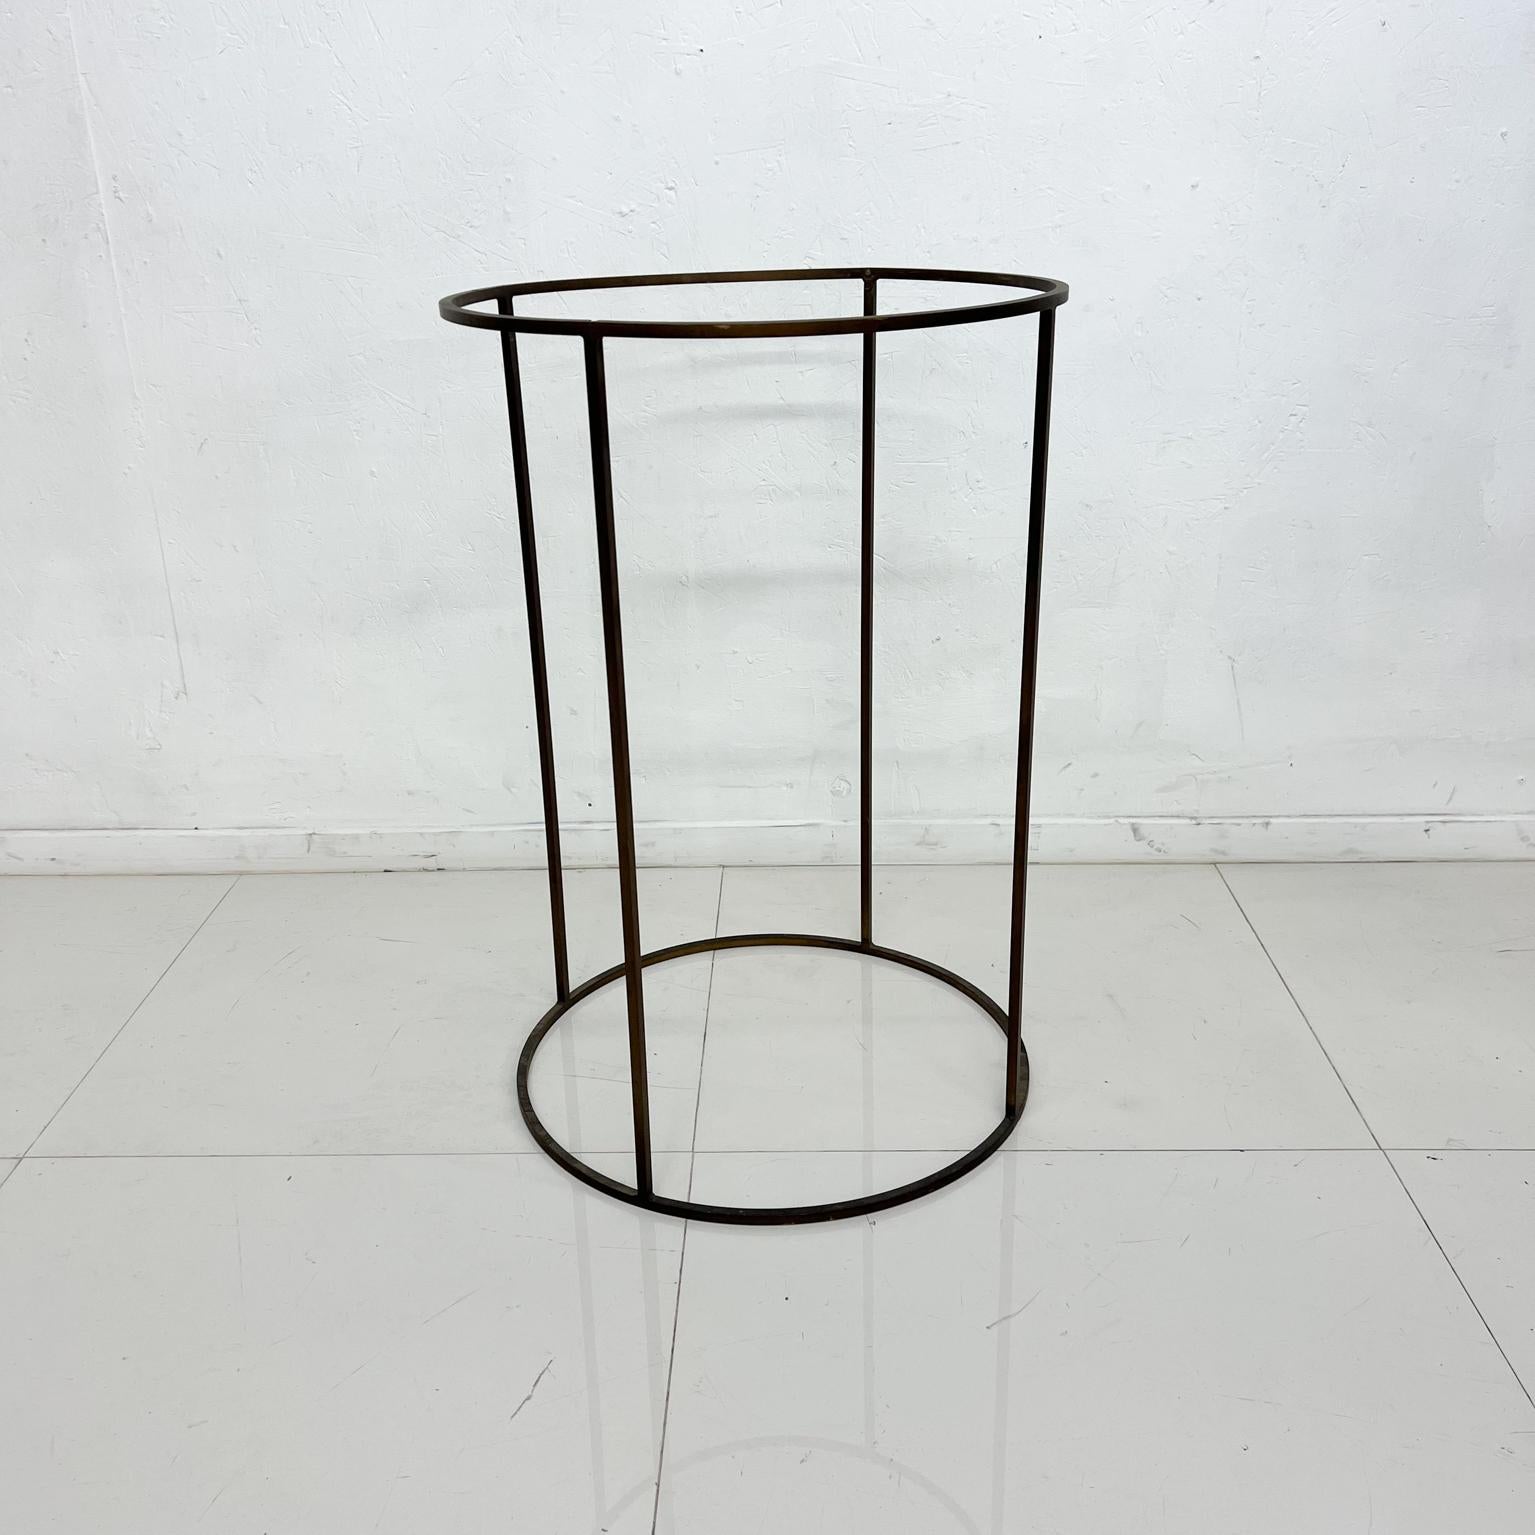 Brass stand
Attributed to Paul McCobb solid brass round drum base stand - Mid-Century Modern 1960s vintage
Designed originally as a globe stand, no globe is included.
No label.
Measures: 28.5 tall x 19.5 diameter metal .38 thick
Patinated